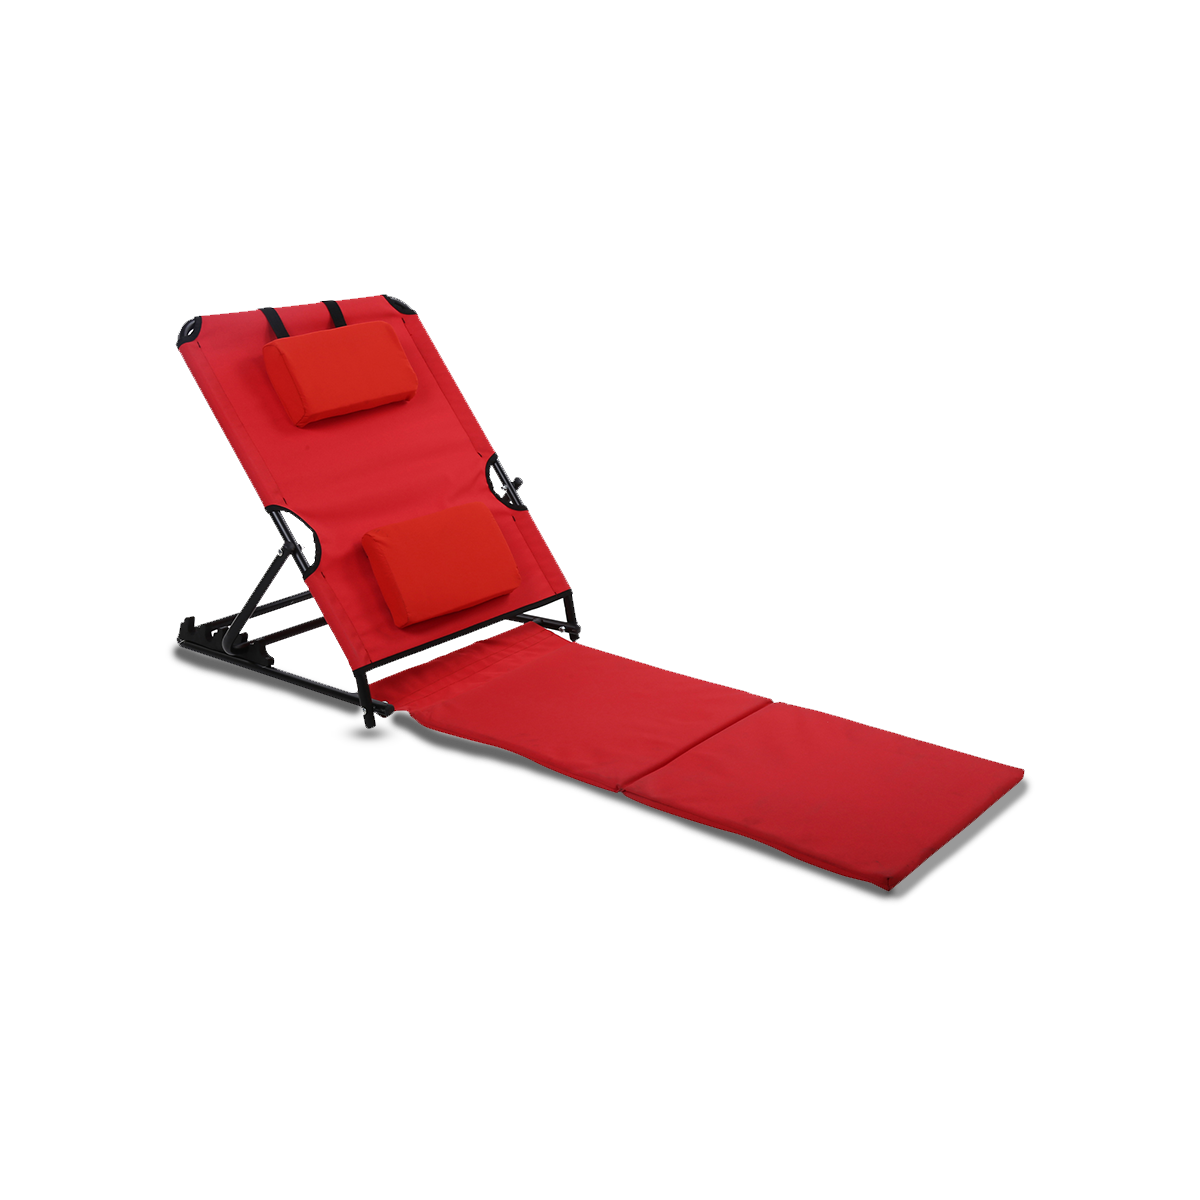 Adjustable Recliner Bed for Camping, Outing, Trekking